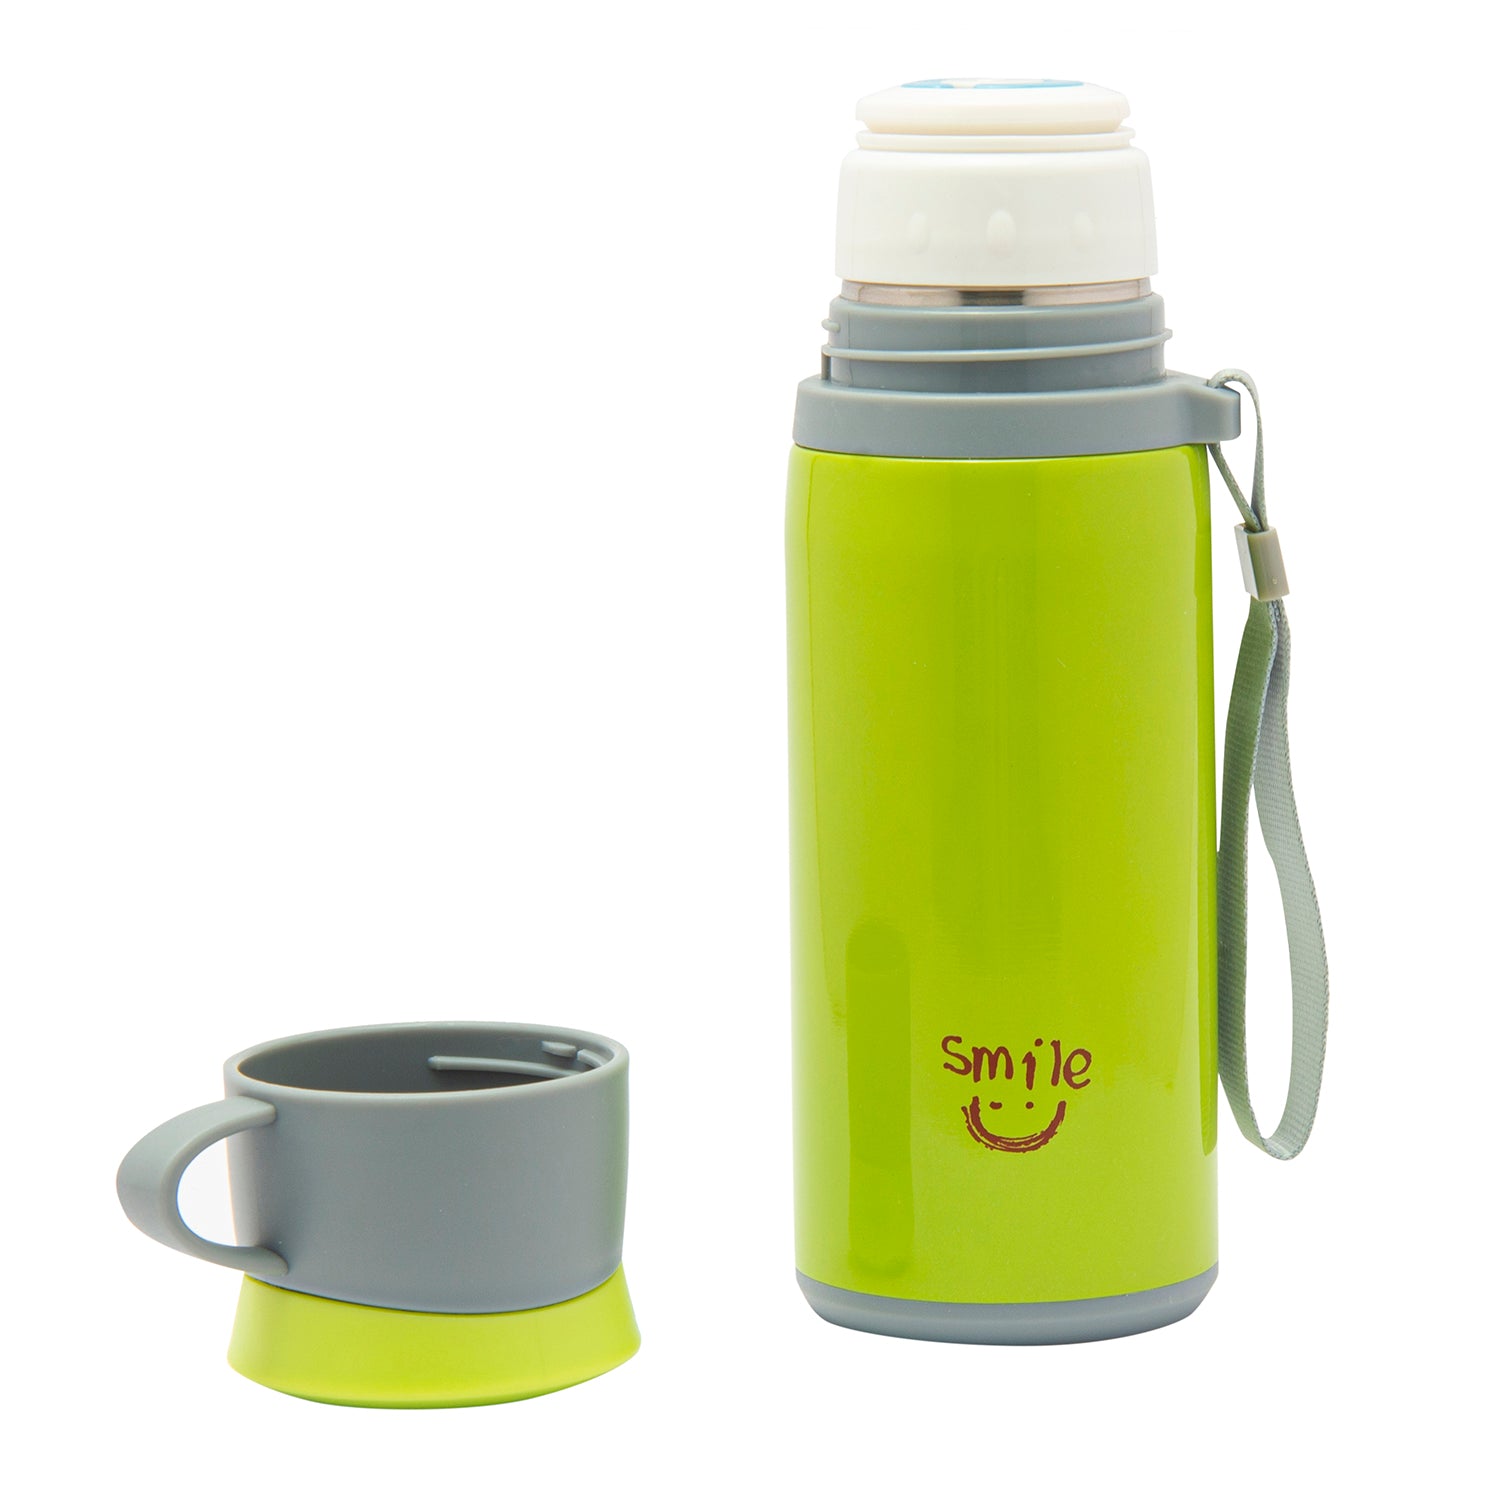 Solid Green 350 ml Stainless Steel Flask